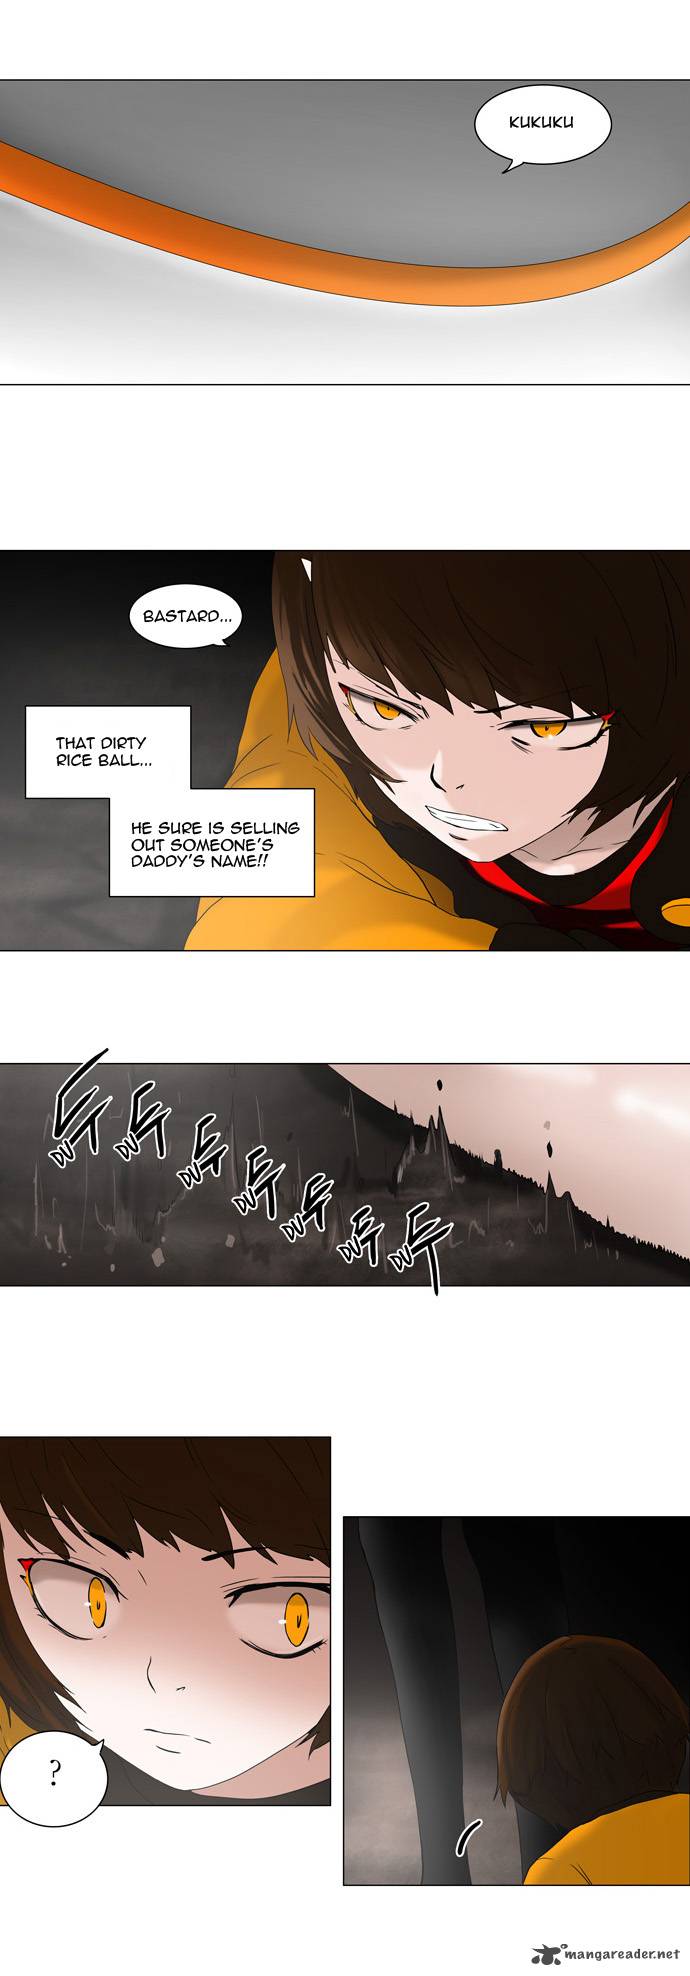 Tower Of God 70 17